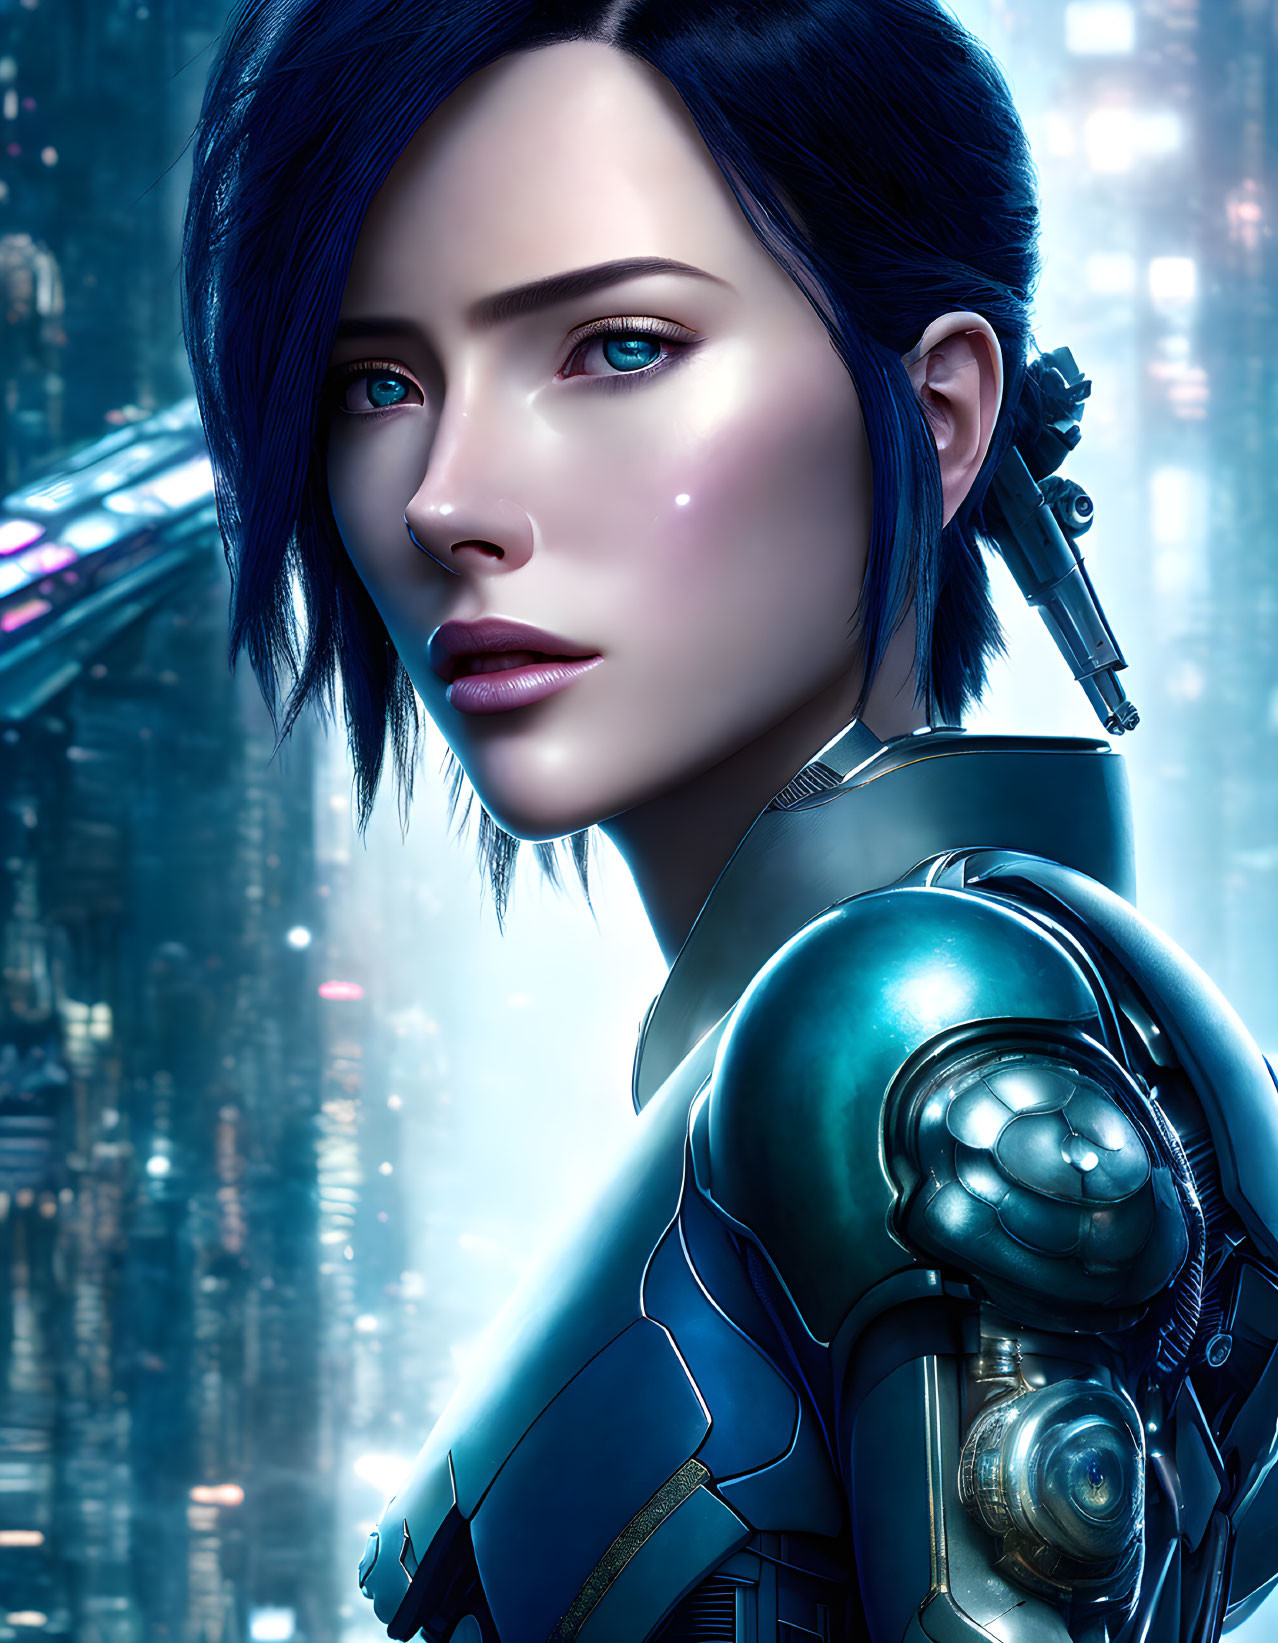 Female cyborg with blue hair in futuristic armor against neon cityscape